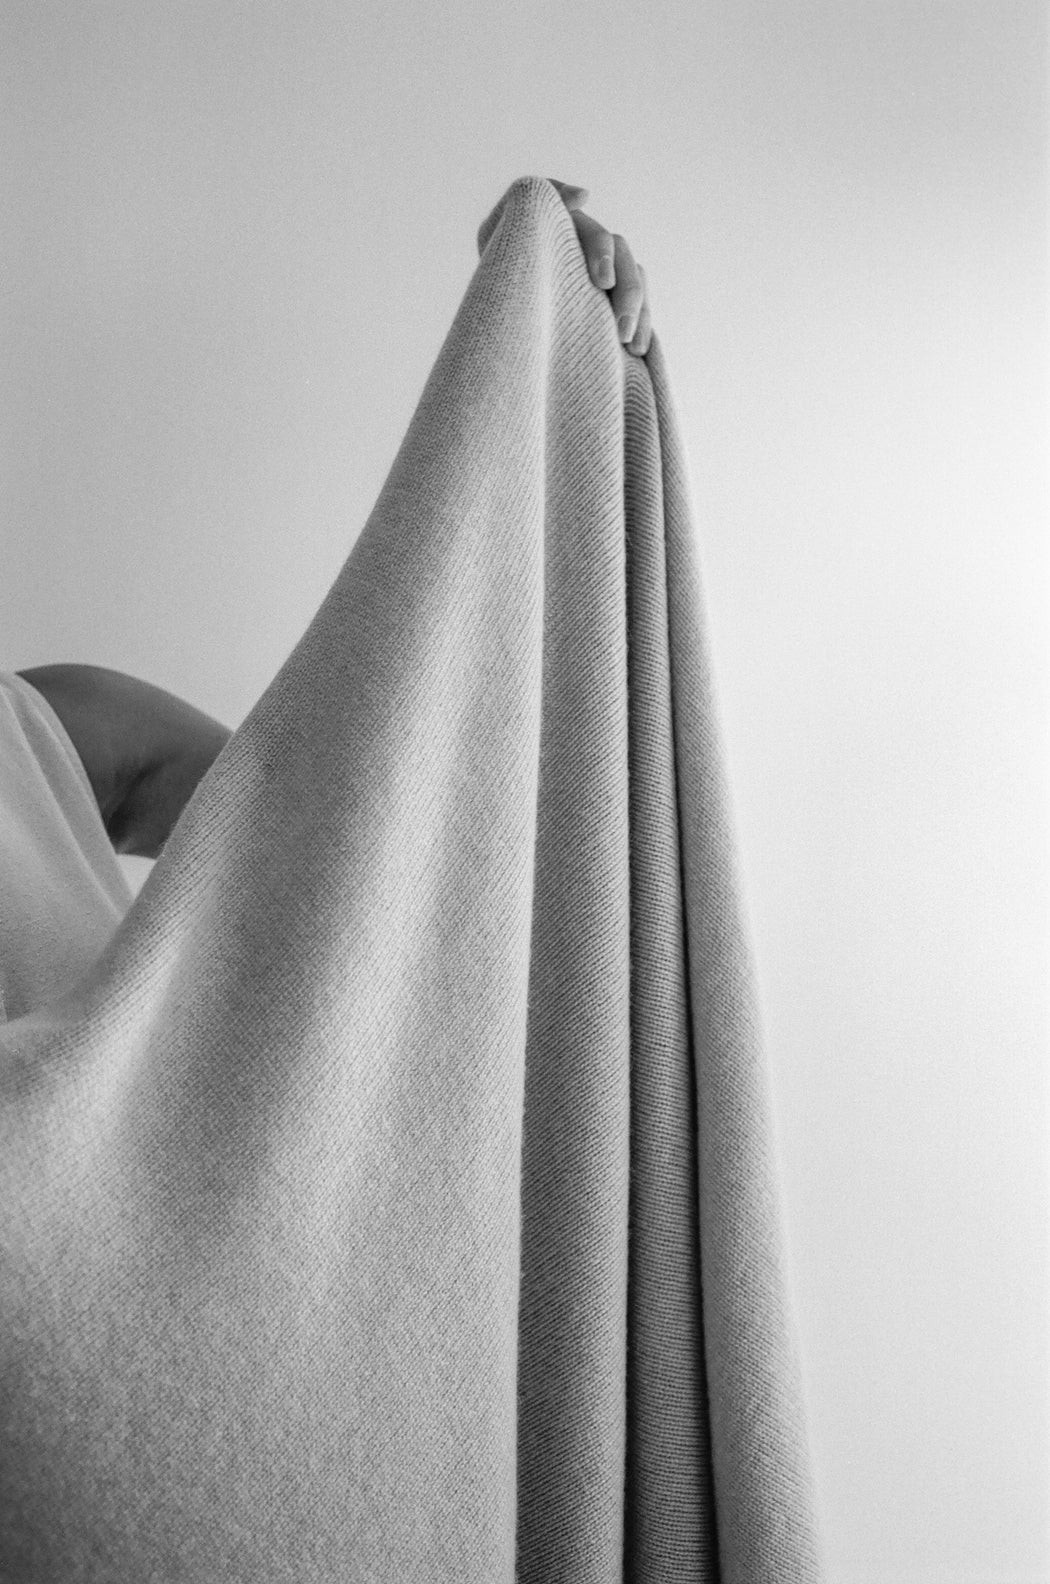 Bespoke Oversized Cashmere Throw - Custom Colors Made to Order (8-Week Lead Time)